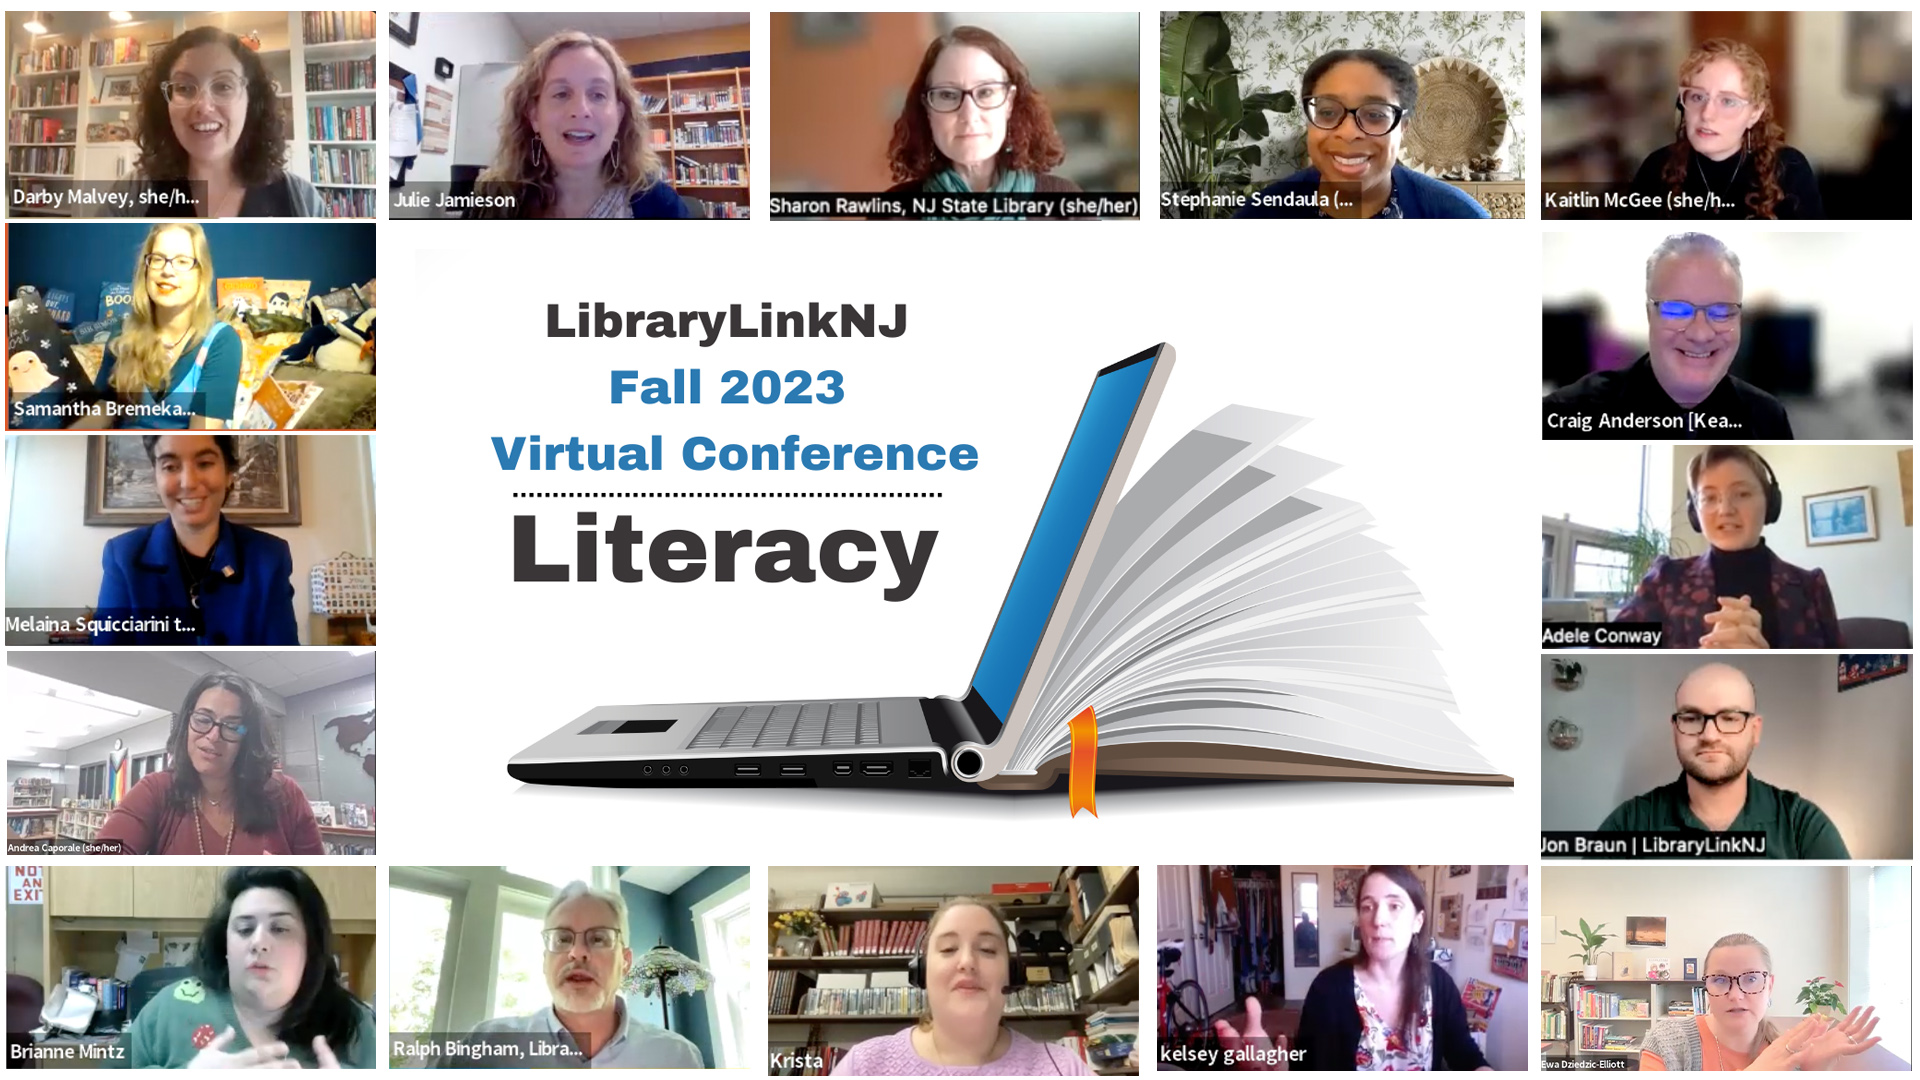 Screenshots of participants are pictured, surrounding the LLNJ Virtual Conference on Literacy logo.